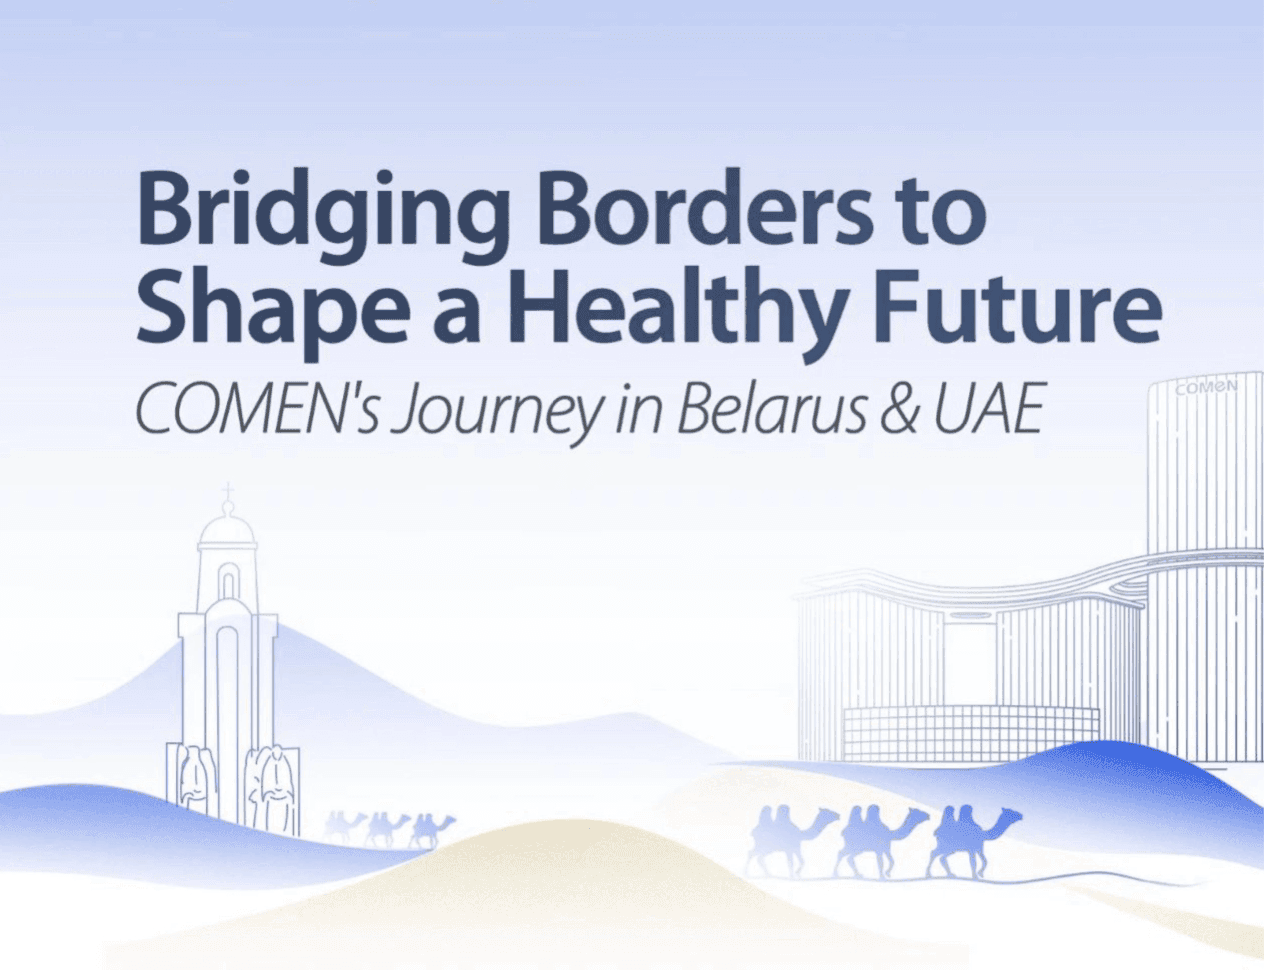 Bridging Borders to Shape a Healthy Future